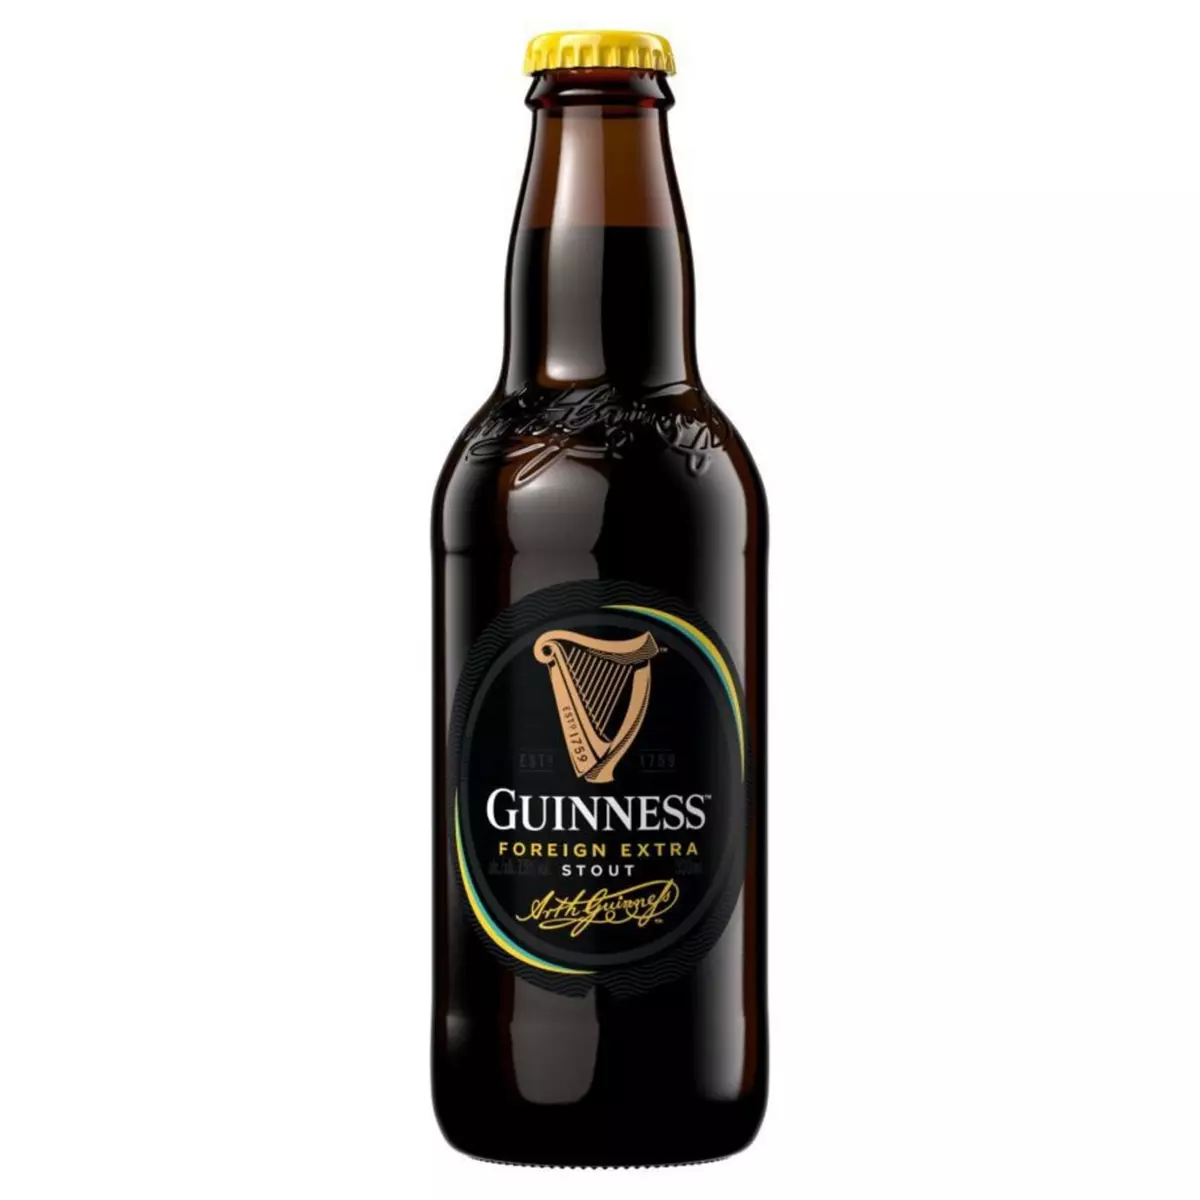 GUINNESS Bière brune extra strong 7,5% bouteille 33cl